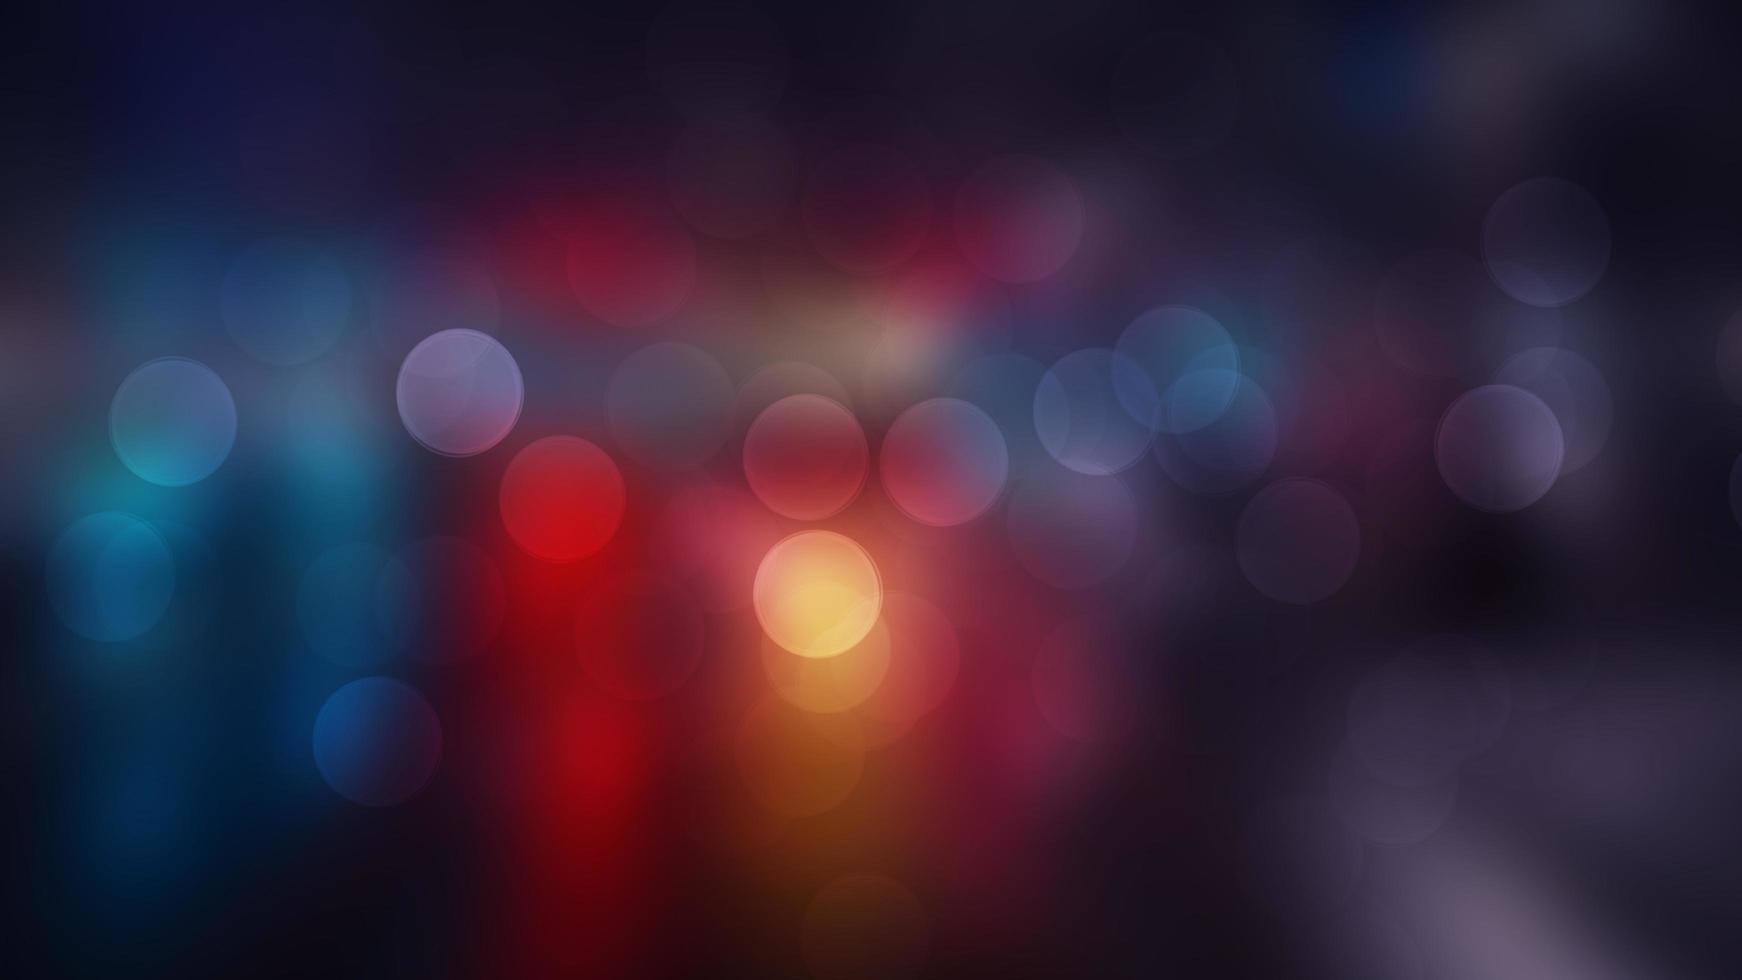 Artistic style - Defocused urban abstract texture bokeh city lights in the background with blurring lights for your design, vintage or retro color toned photo